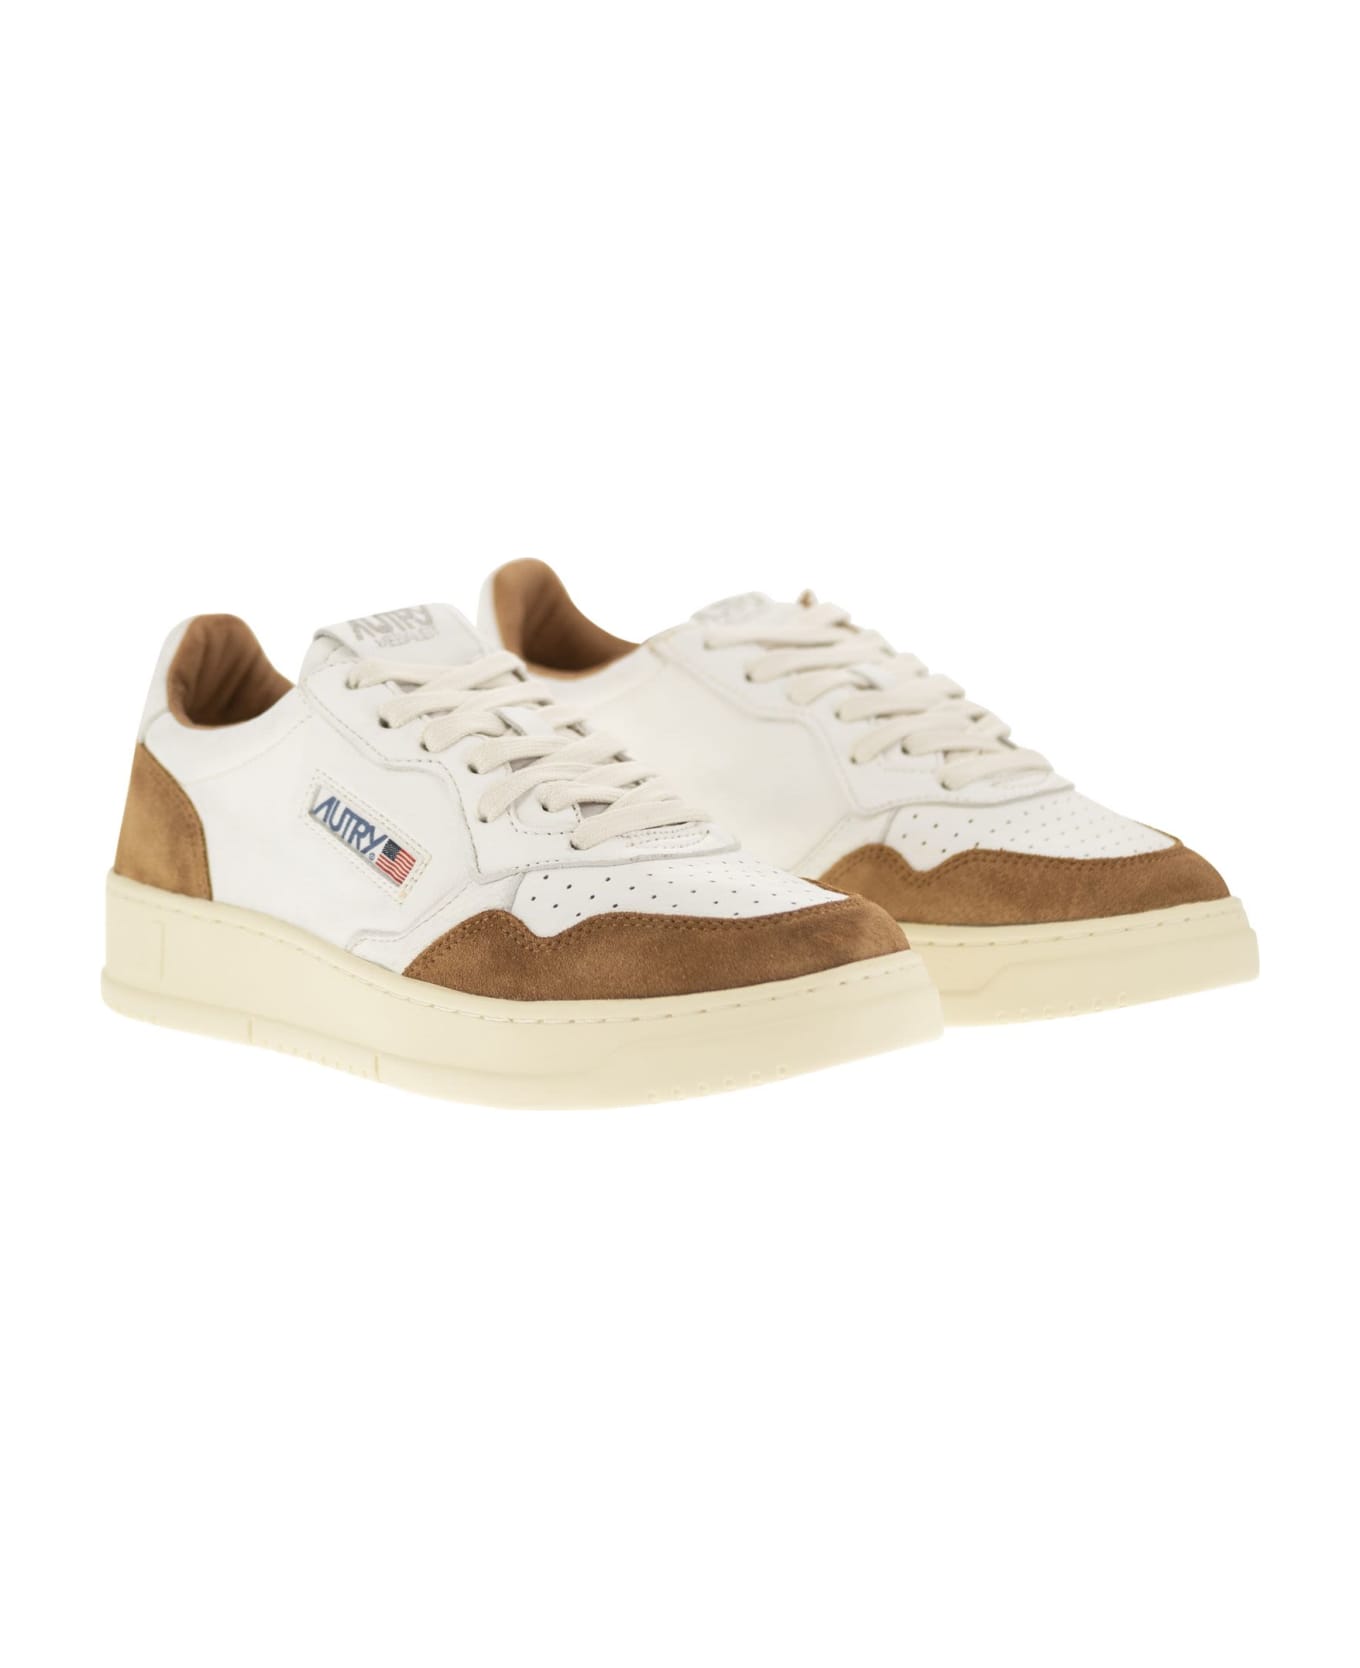 Autry Medalist Low Sneakers - White/caramel